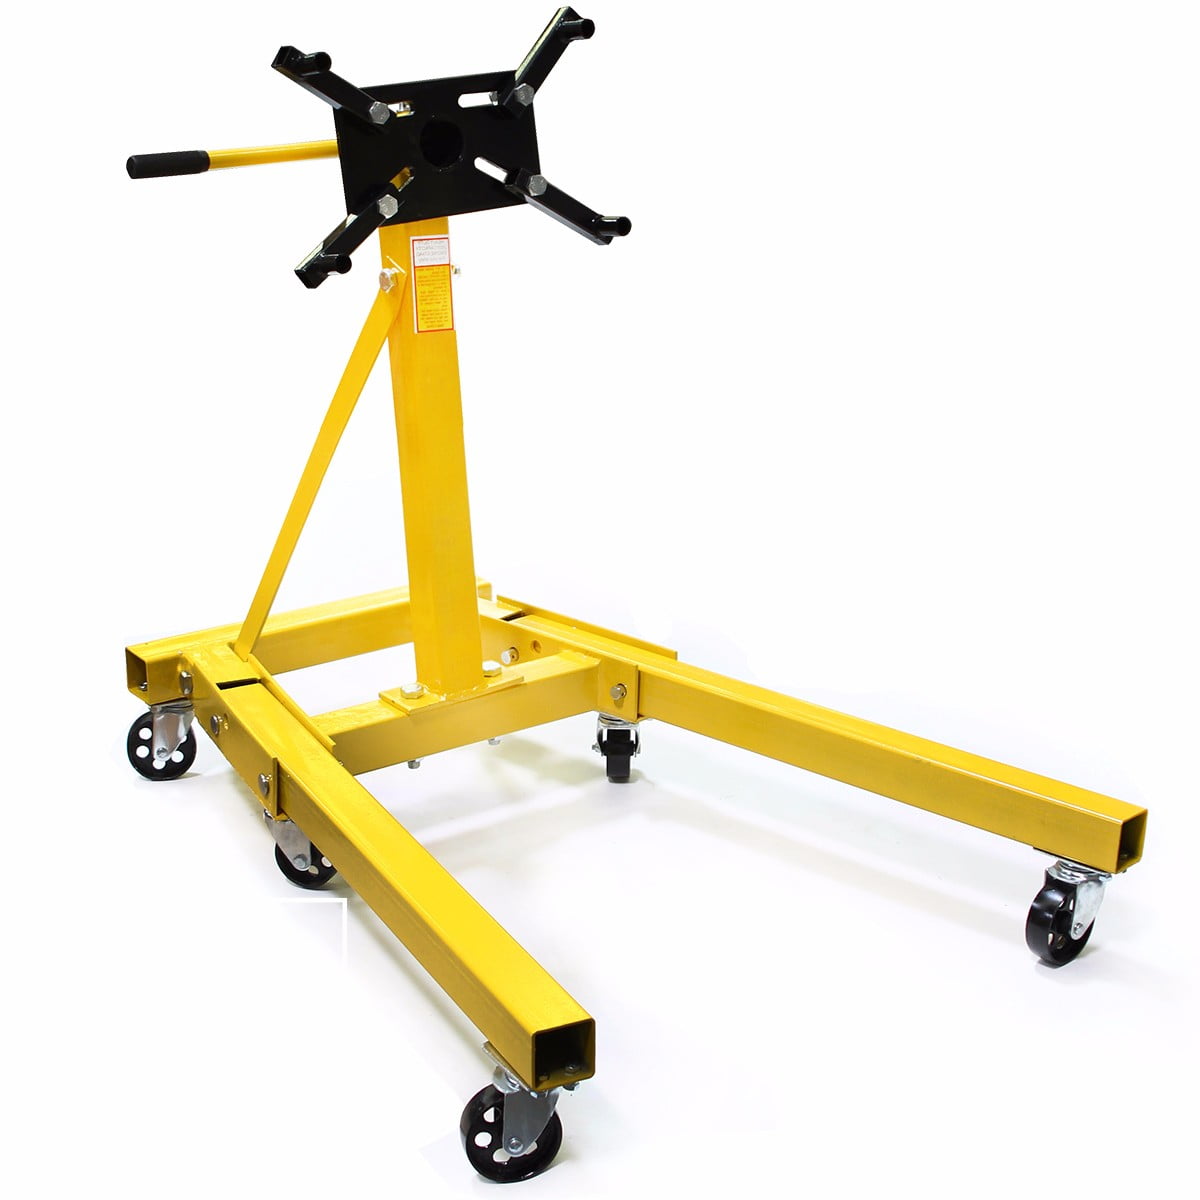 Aluminium Alloy High Strength with Installation Instructions Motor Stand and Shift Boxes Claw Jack Easel for Holding the Engine Motor Support Transmission up to 450 kg 